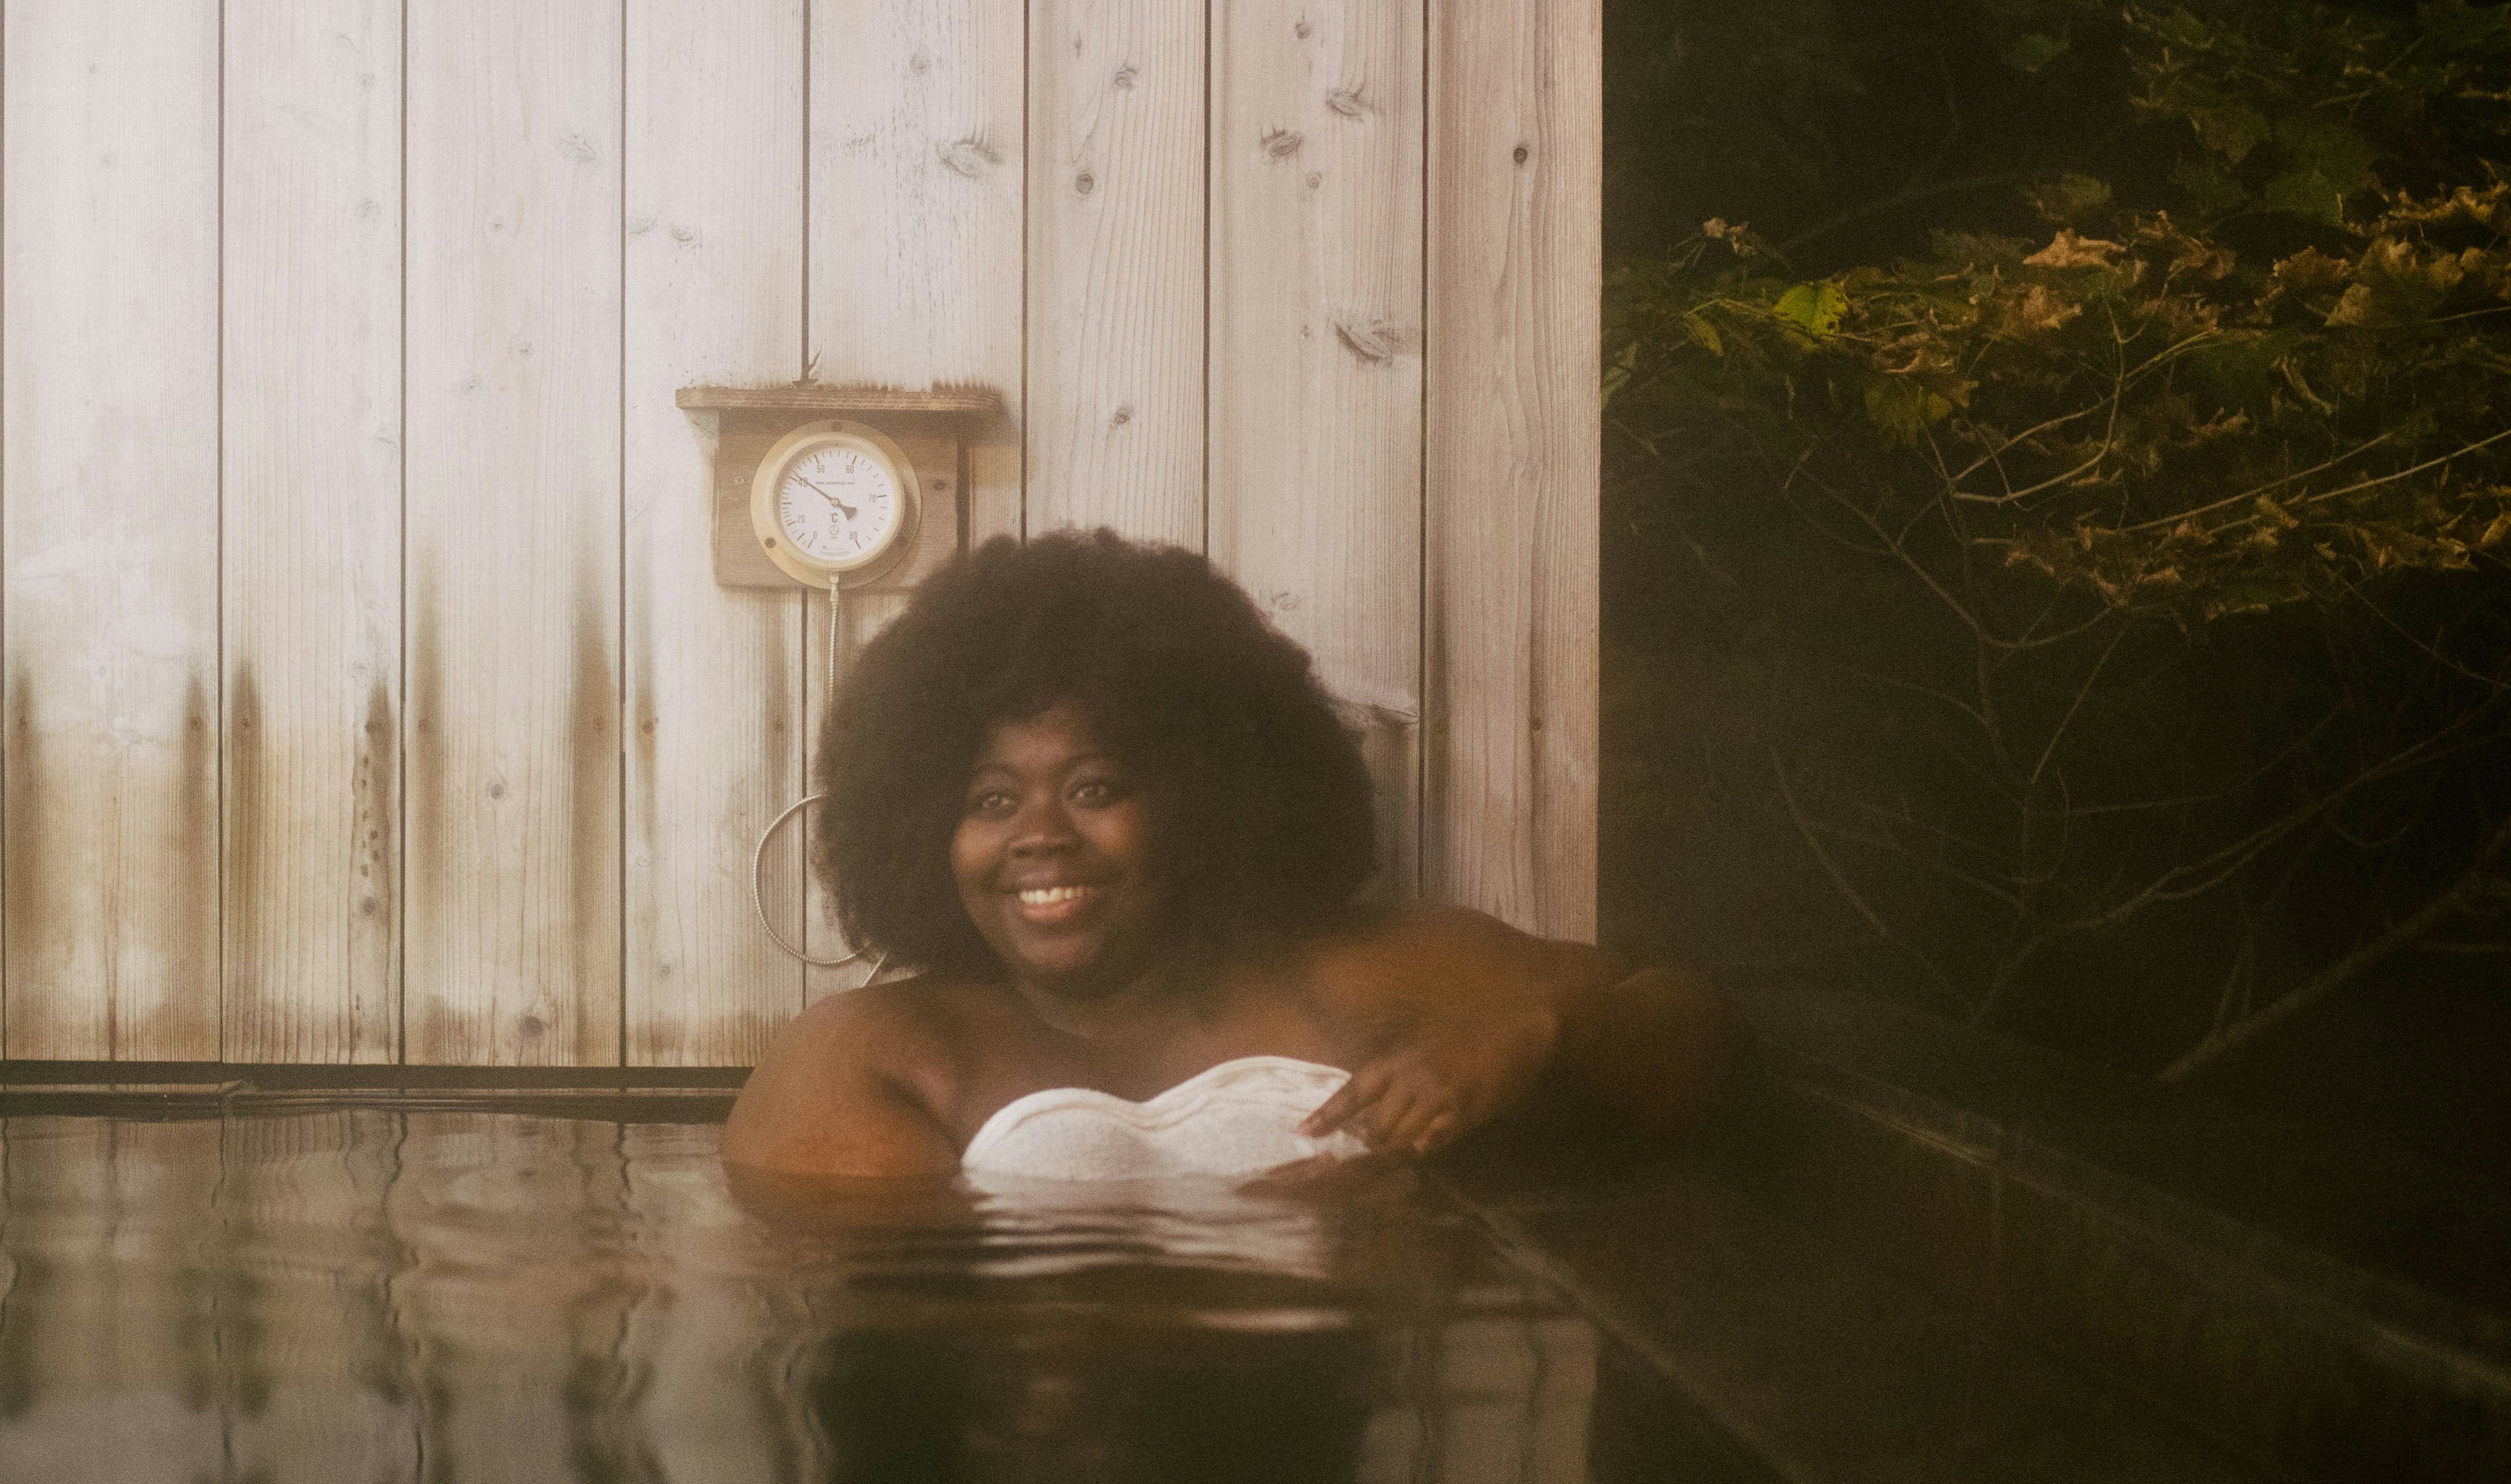 Stephanie Yeboah relaxes in the hot water with a white towel to protect her modesty